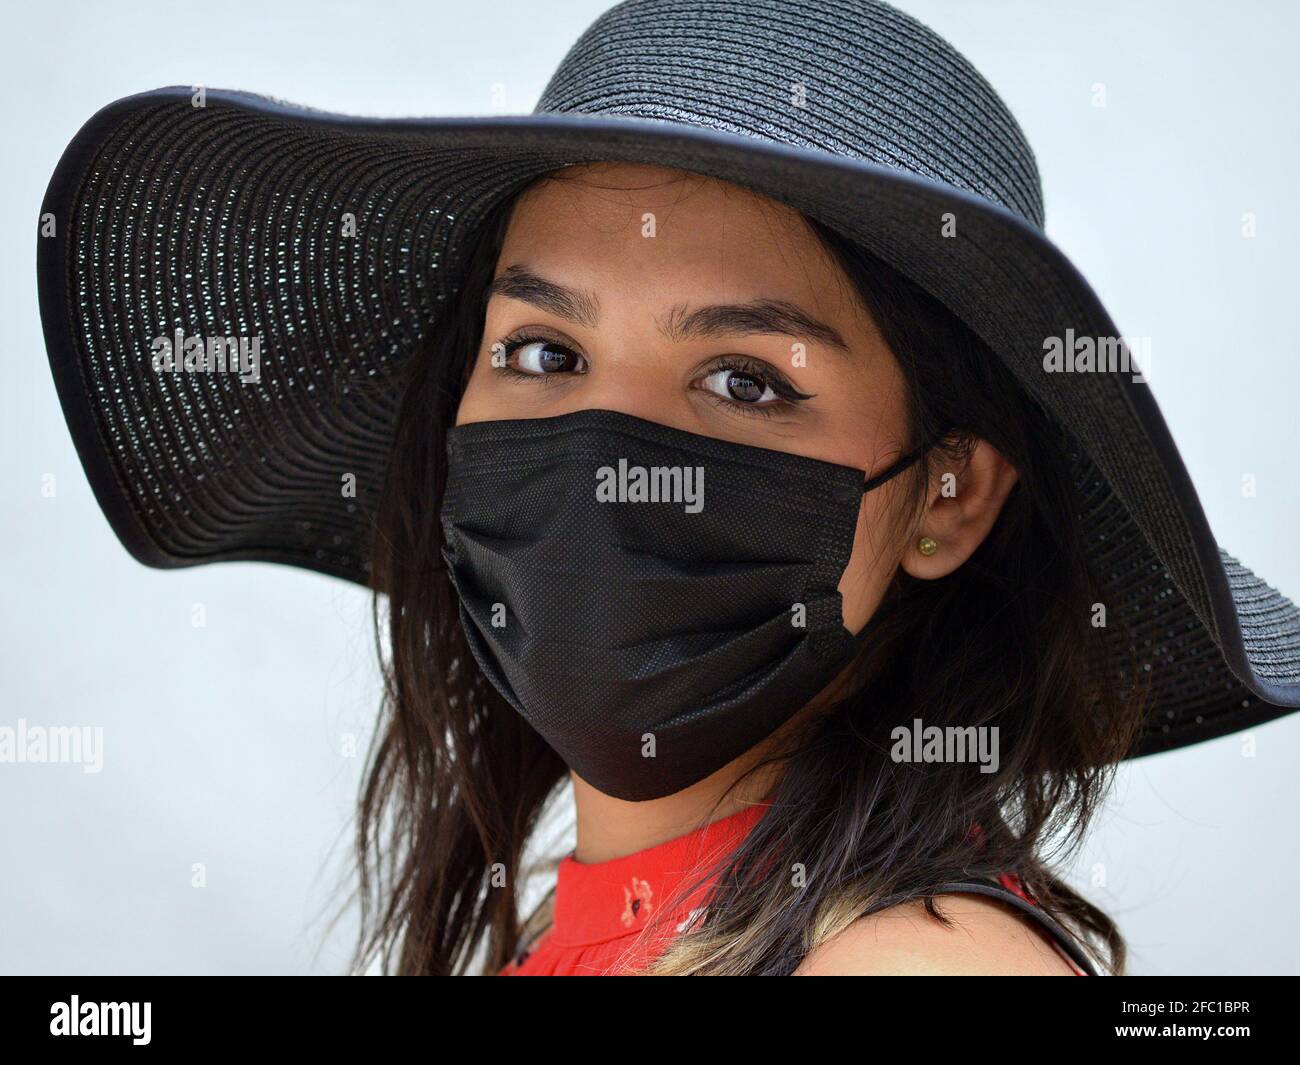 Young Mexican brunette woman with beautiful brown eyes wears a black floppy sun hat and a disposable black face mask during the coronavirus pandemic. Stock Photo